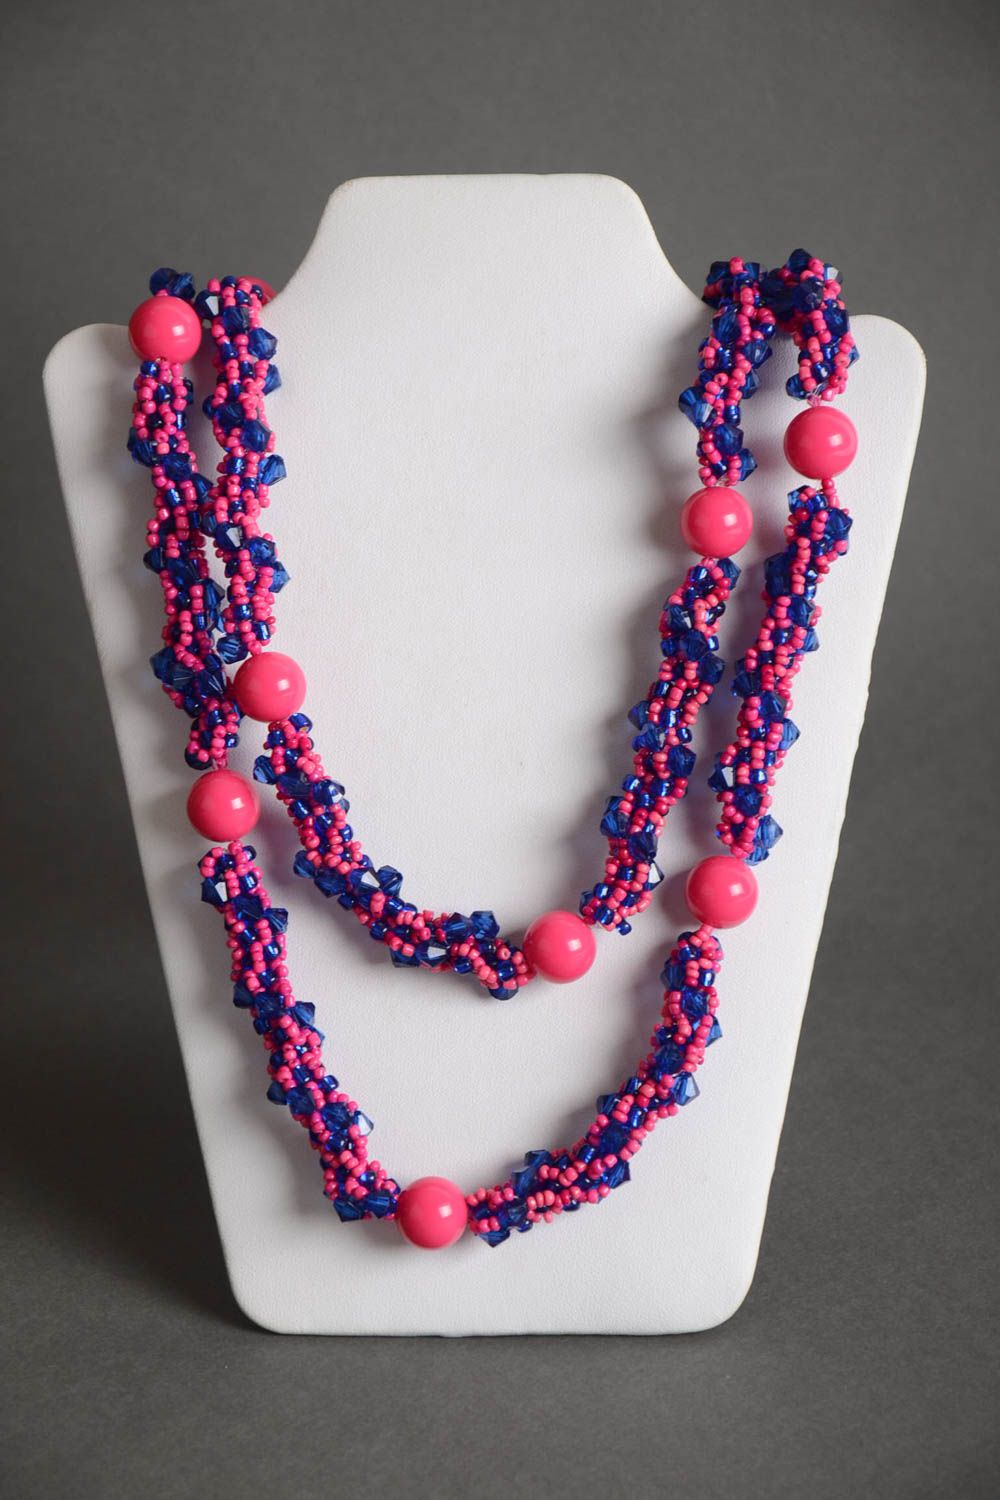 Handmade designer women's necklace crocheted of bright pink and blue Czech beads photo 2